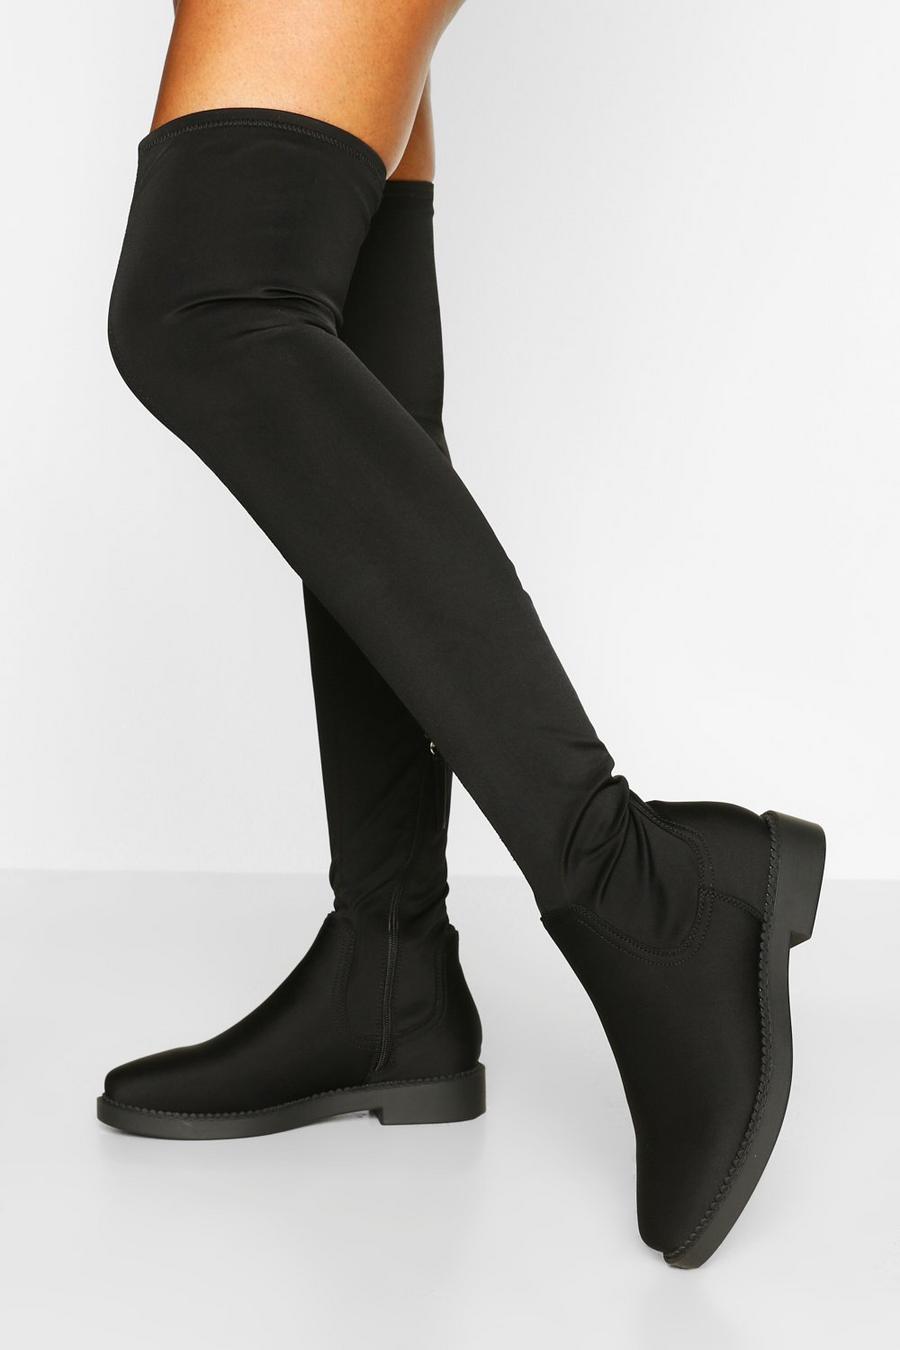 Black noir Flat Stretch Over The Knee Boots